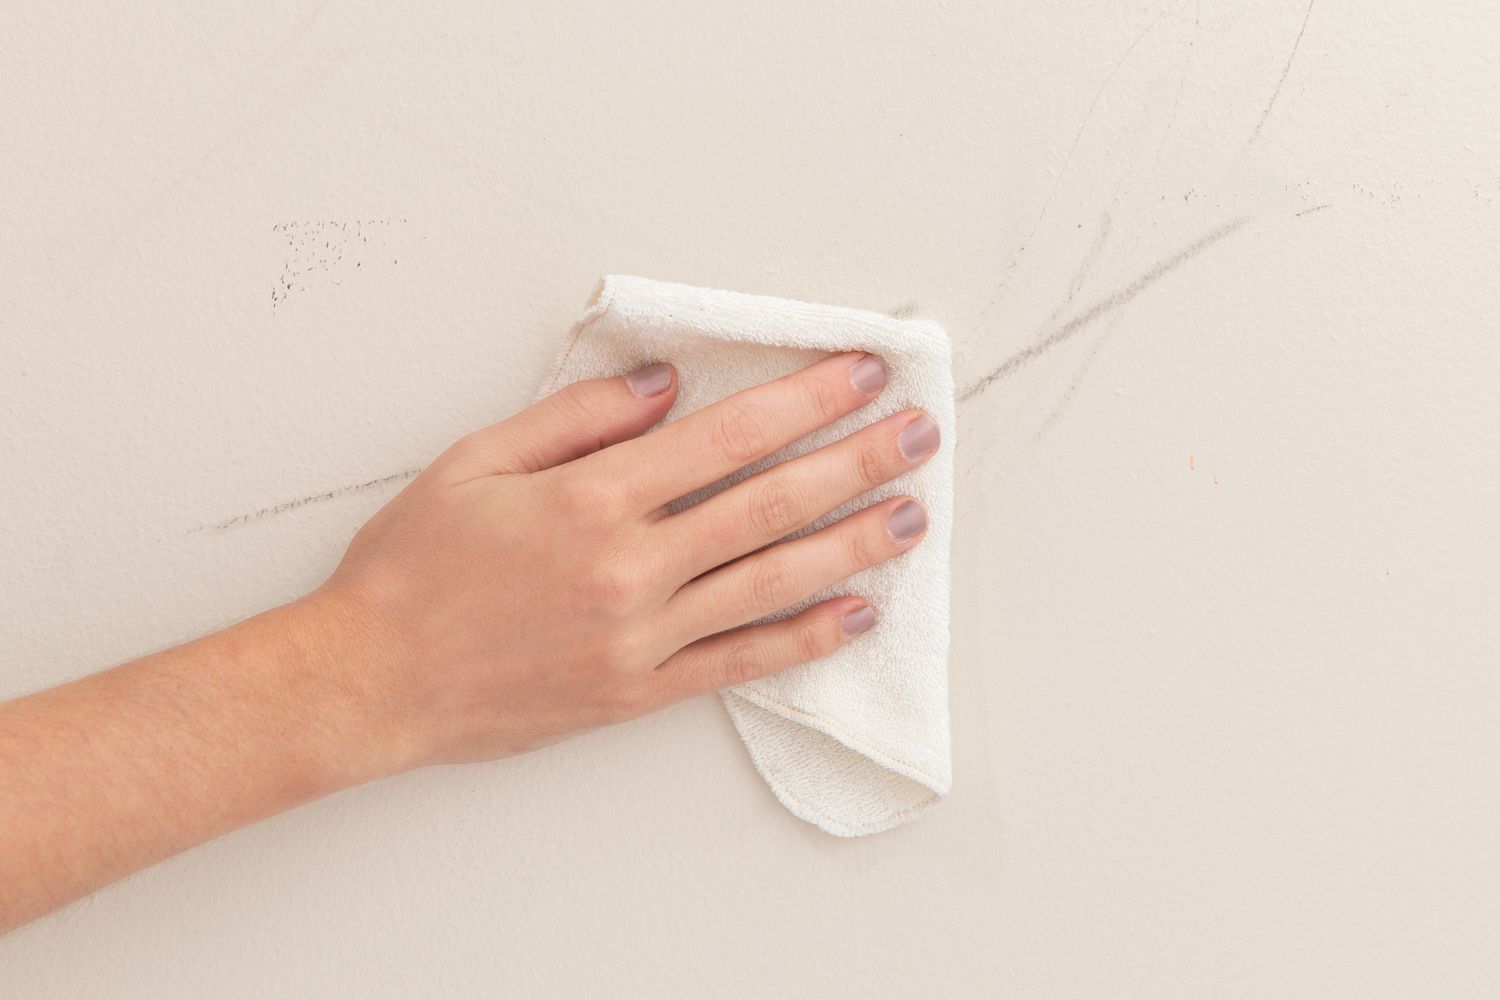 How To Clean Walls To Remove Scuffs And Stains